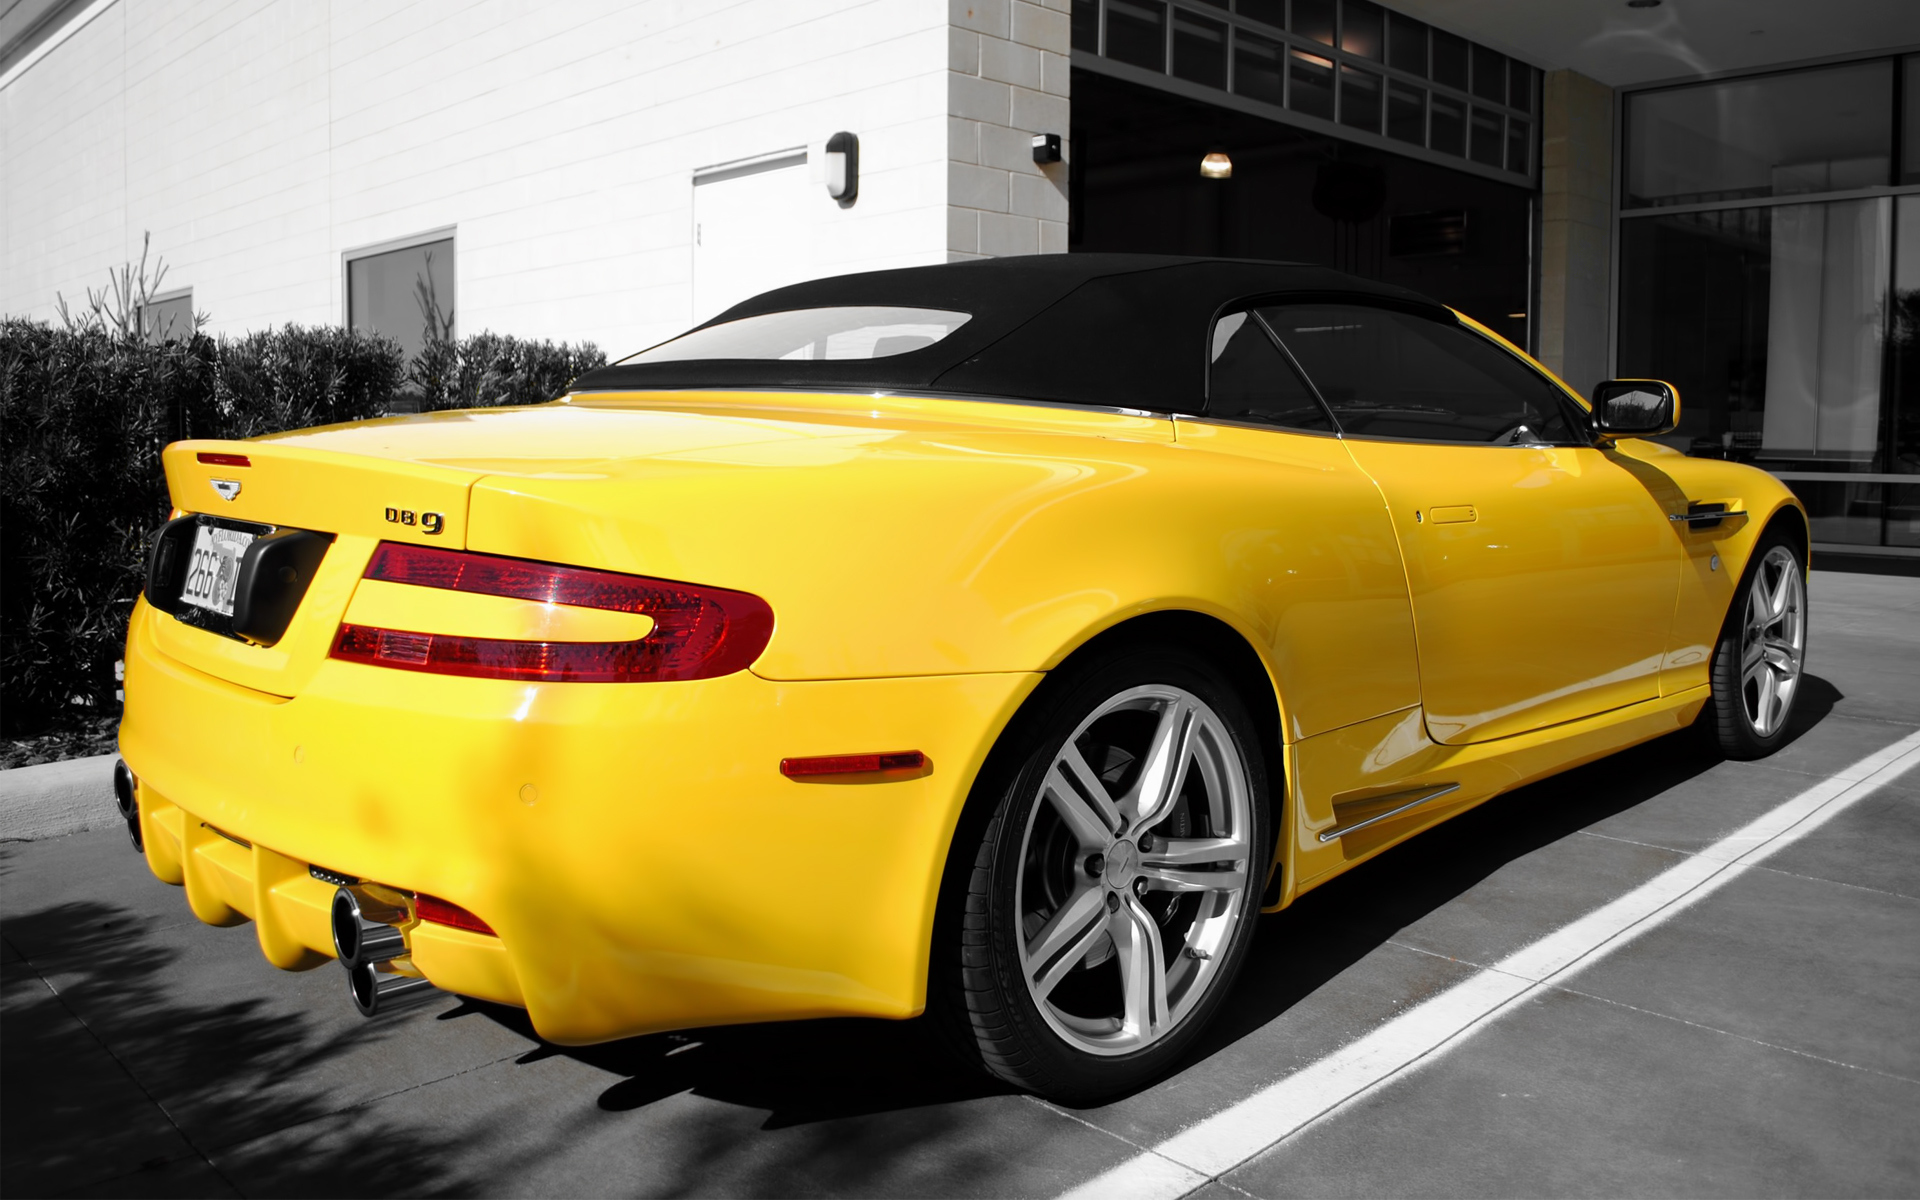 Wallpapers aston martin db9 cabriolet yellow on the desktop